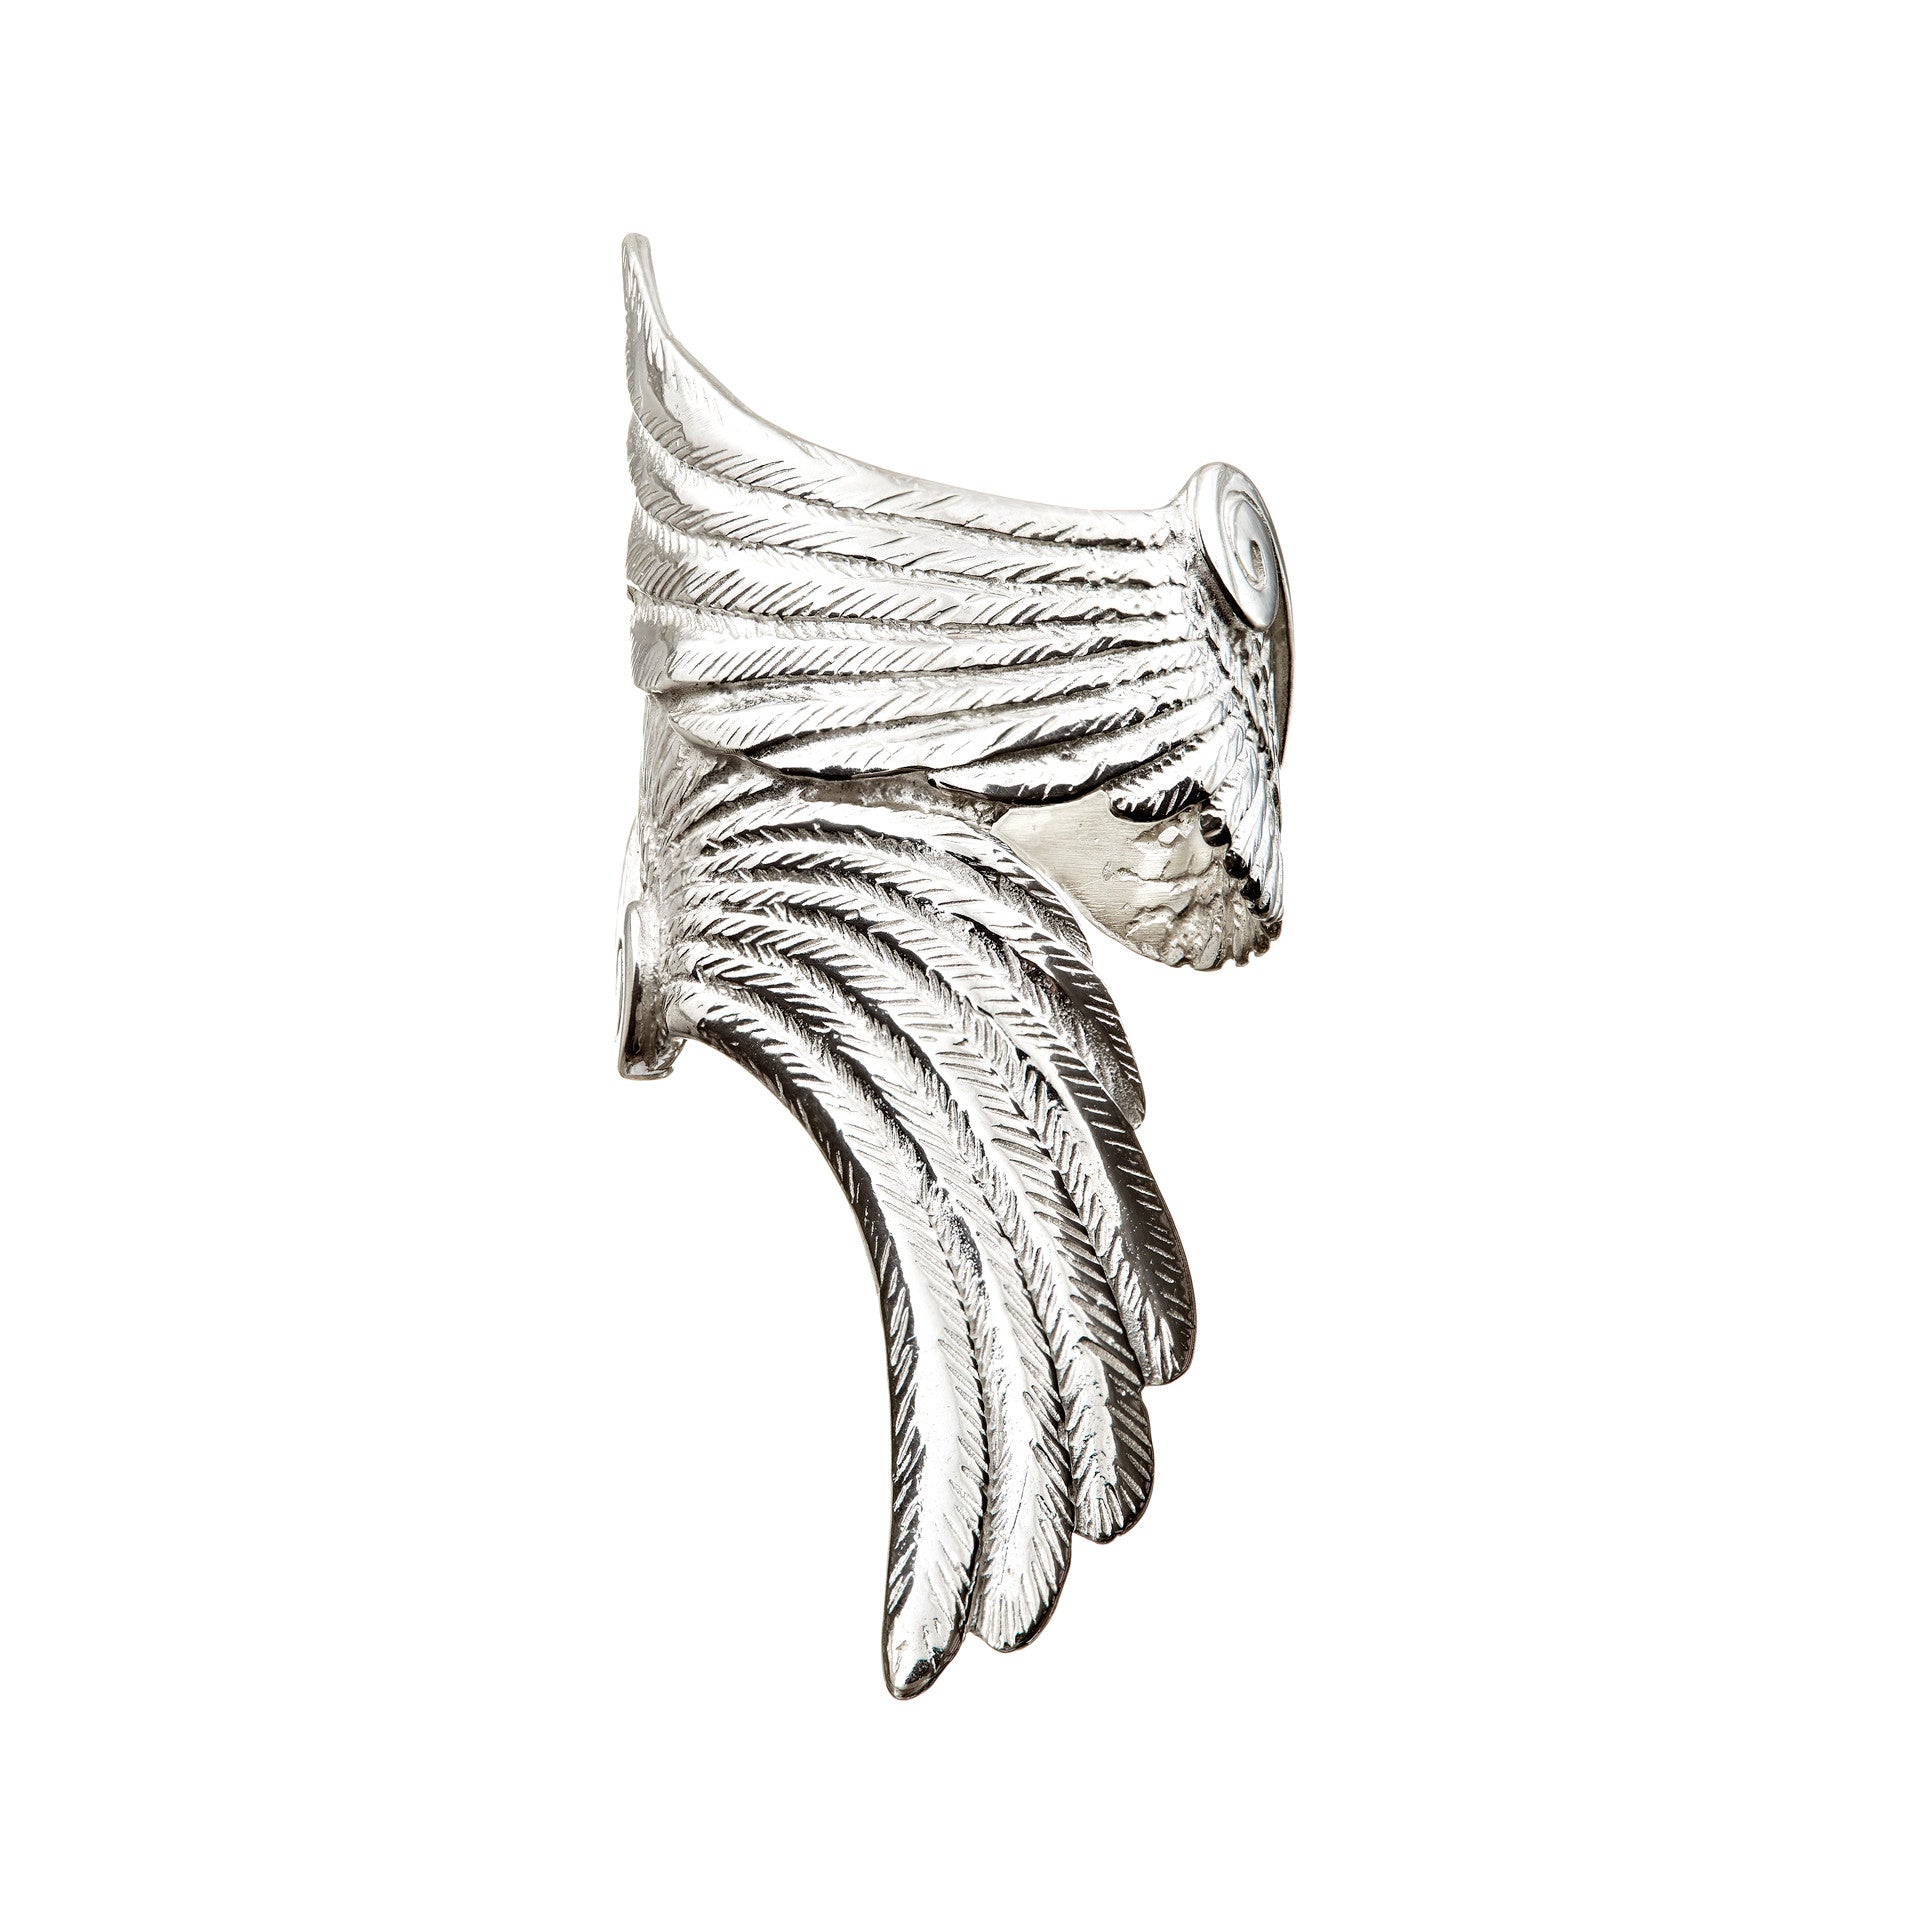 Handmade Irish angel jewelry piece, the Angel Wings Ring made of sterling silver. This ring is part of Elena Brennan's My Angel jewellery collection.